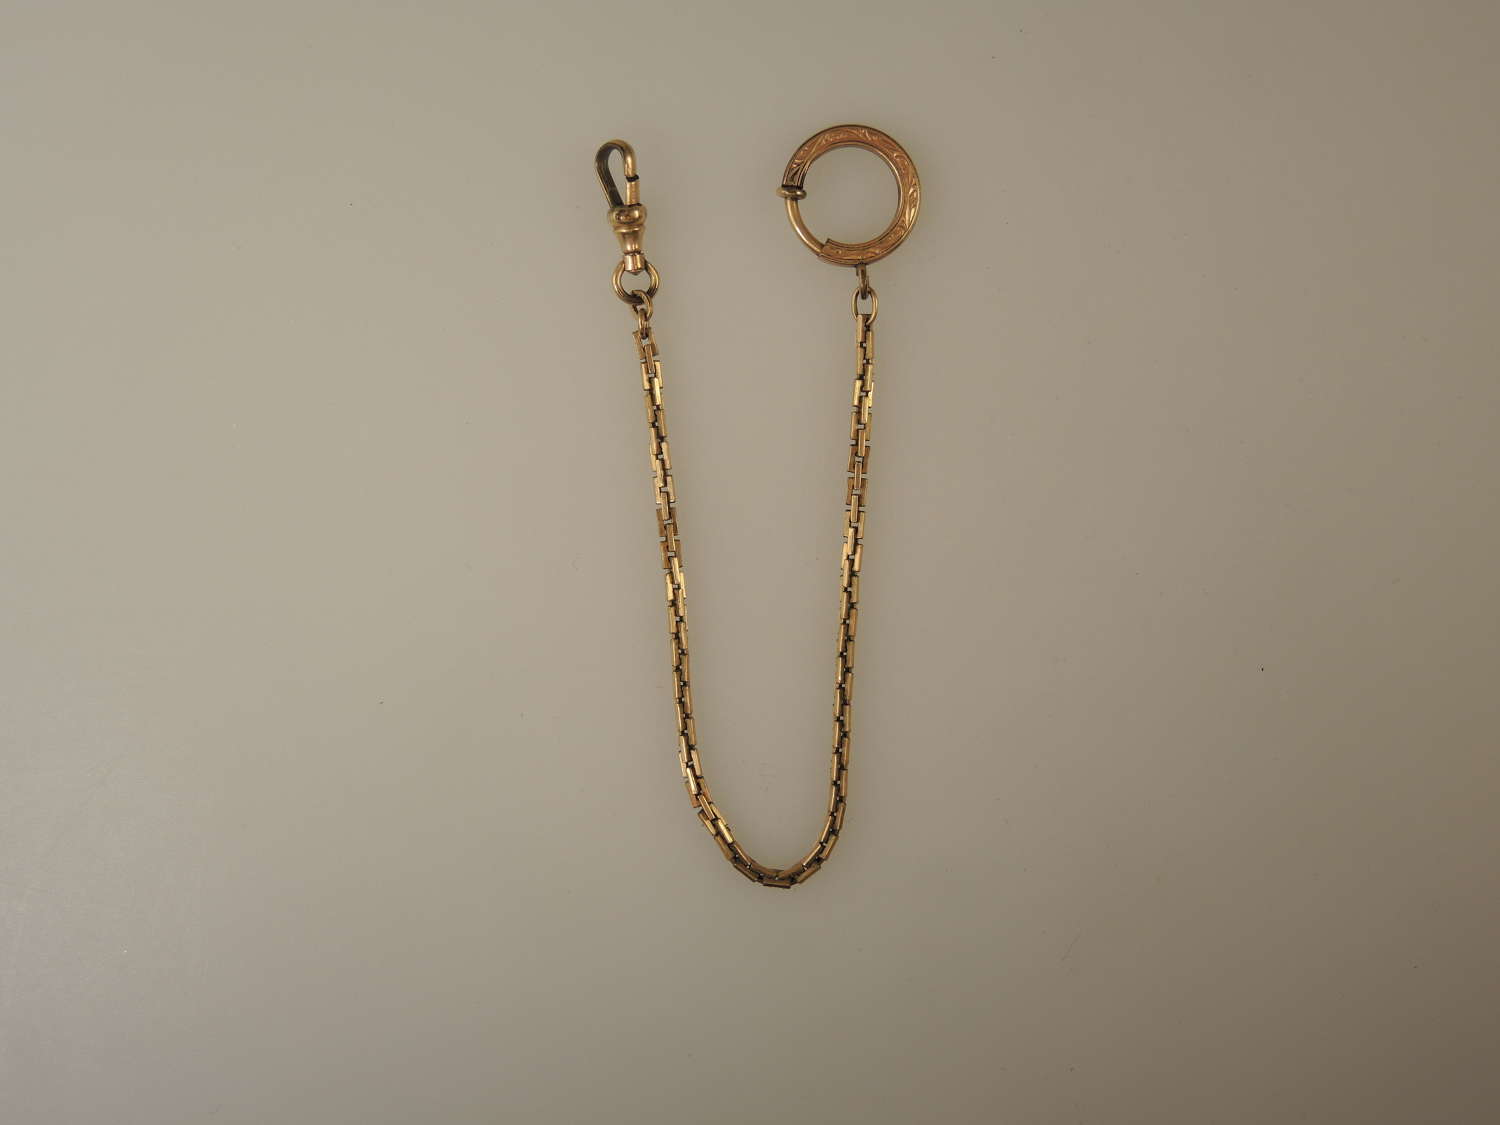 Victorian gold plated pocket watch chain for a blazer pocket c1890